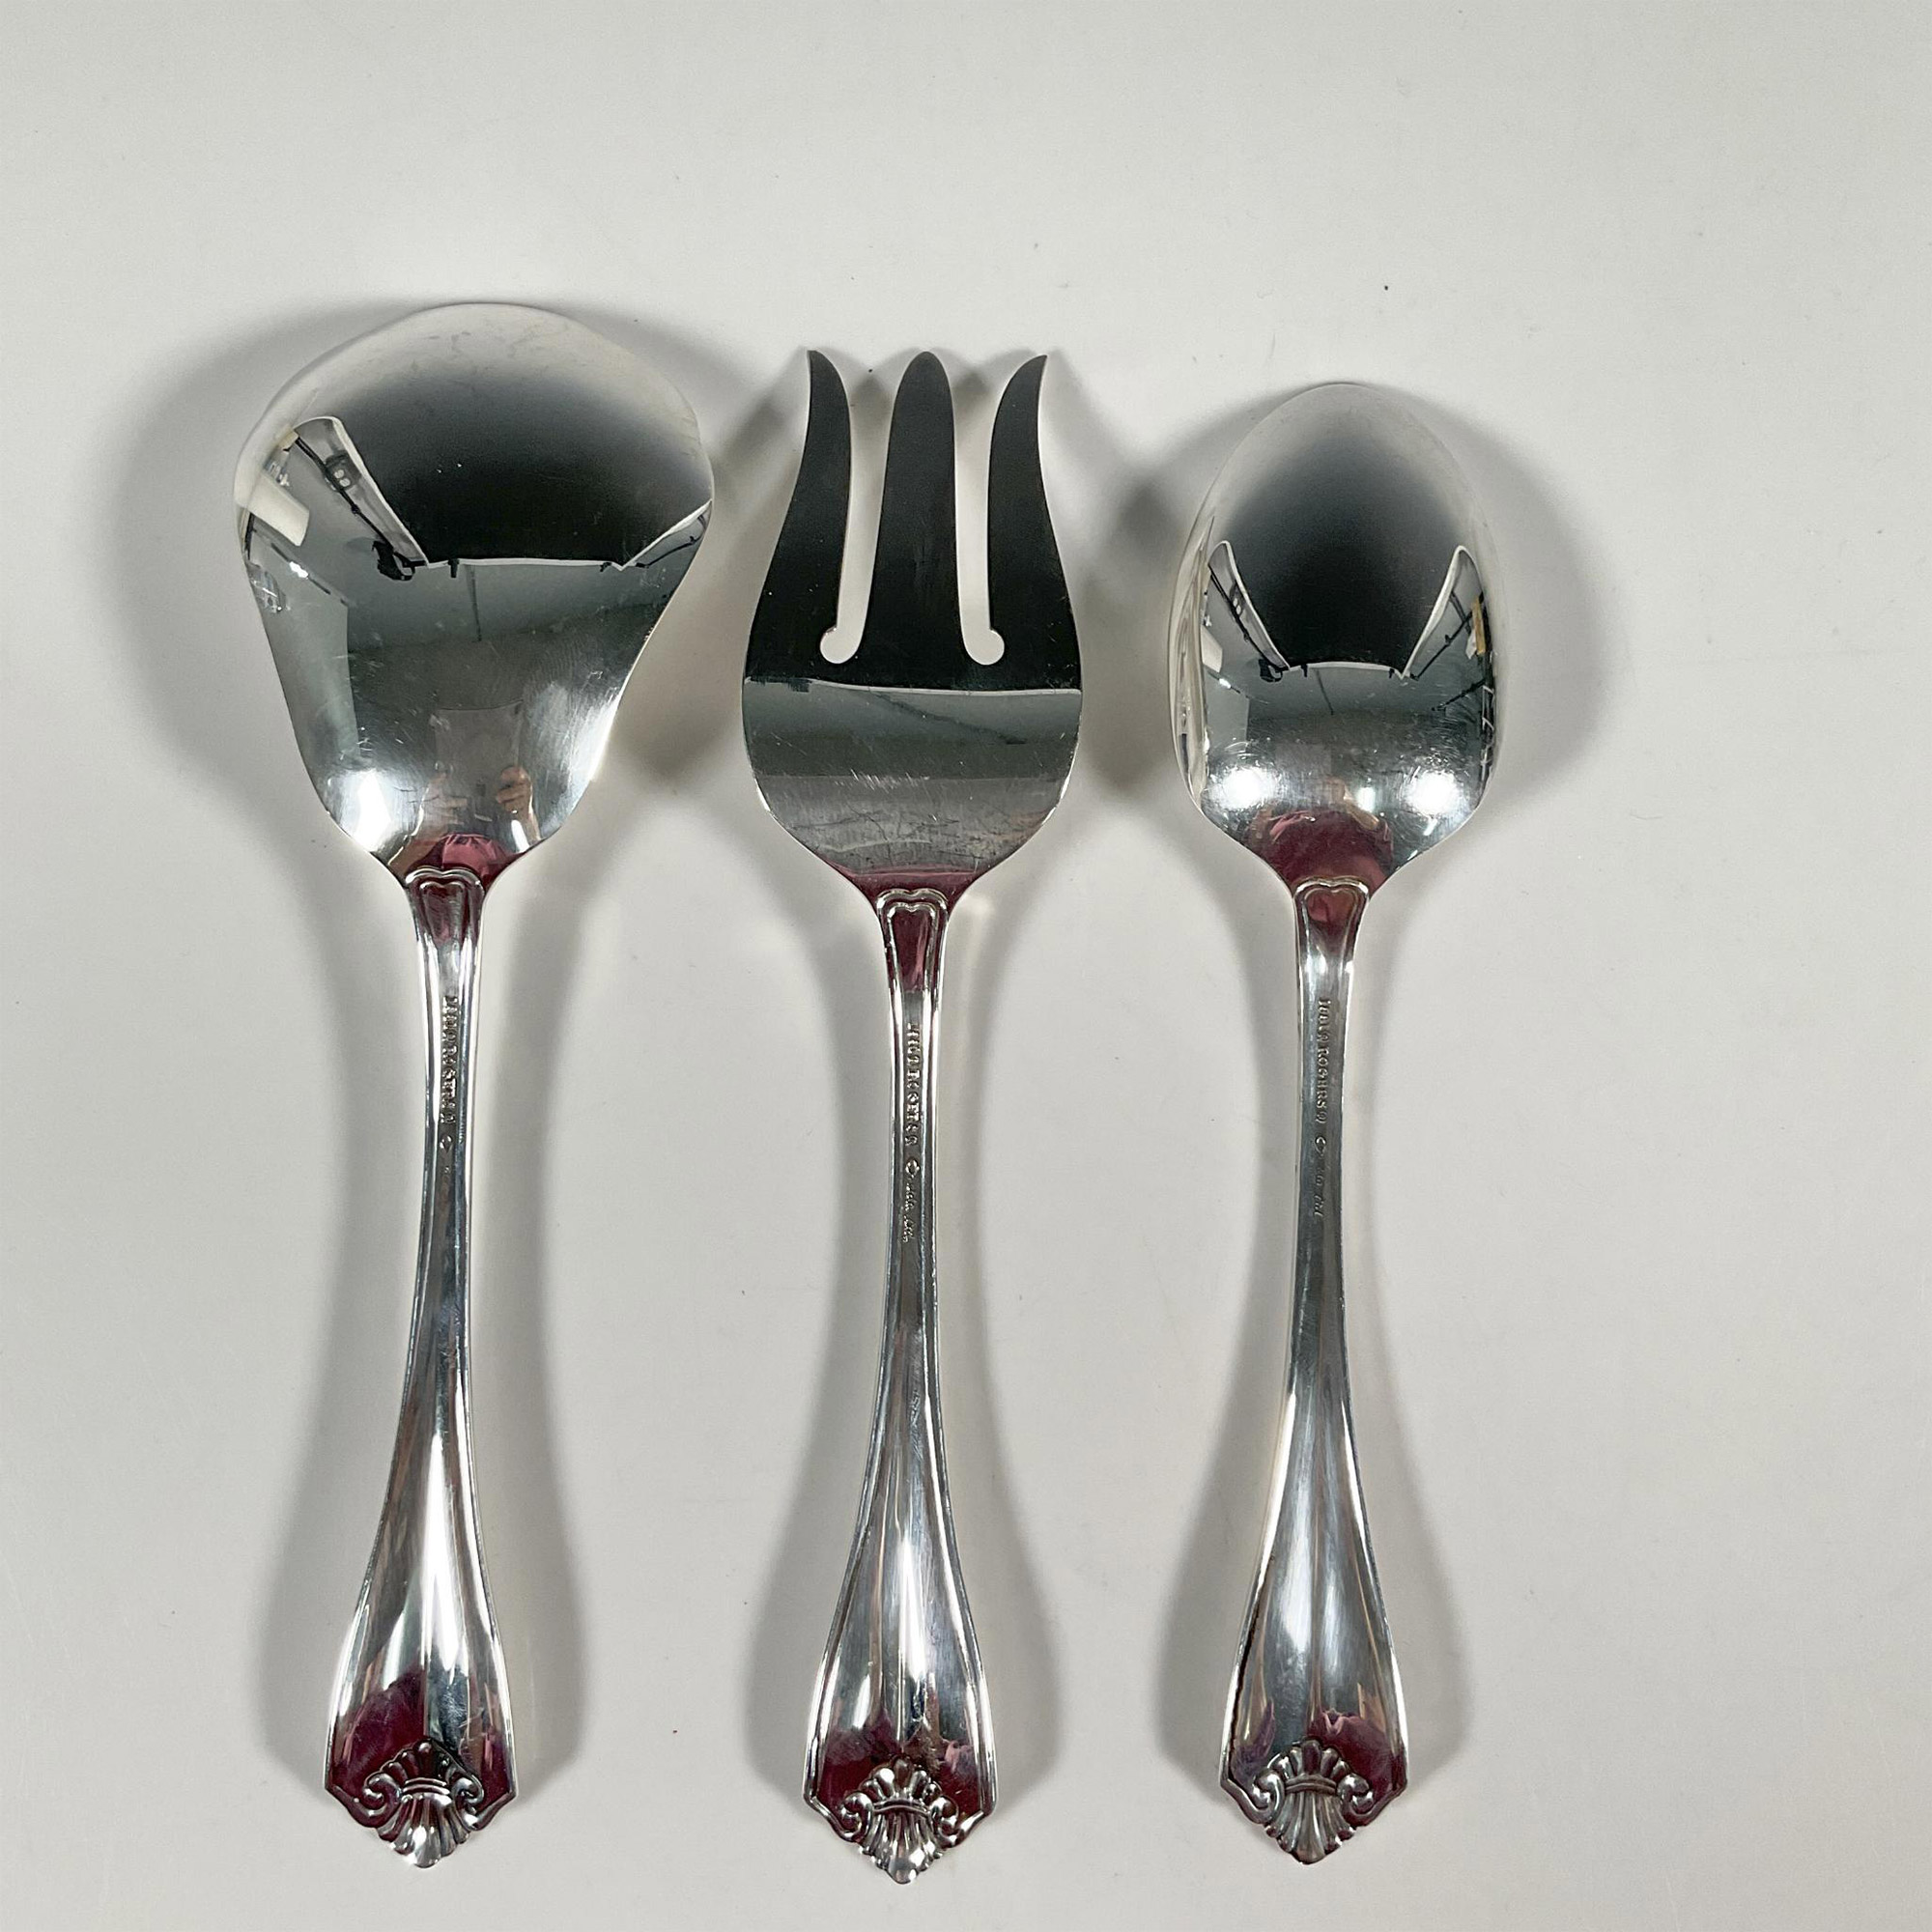 3pc Oneida Silverplate Serving Spoons and Fork, King James - Image 2 of 3